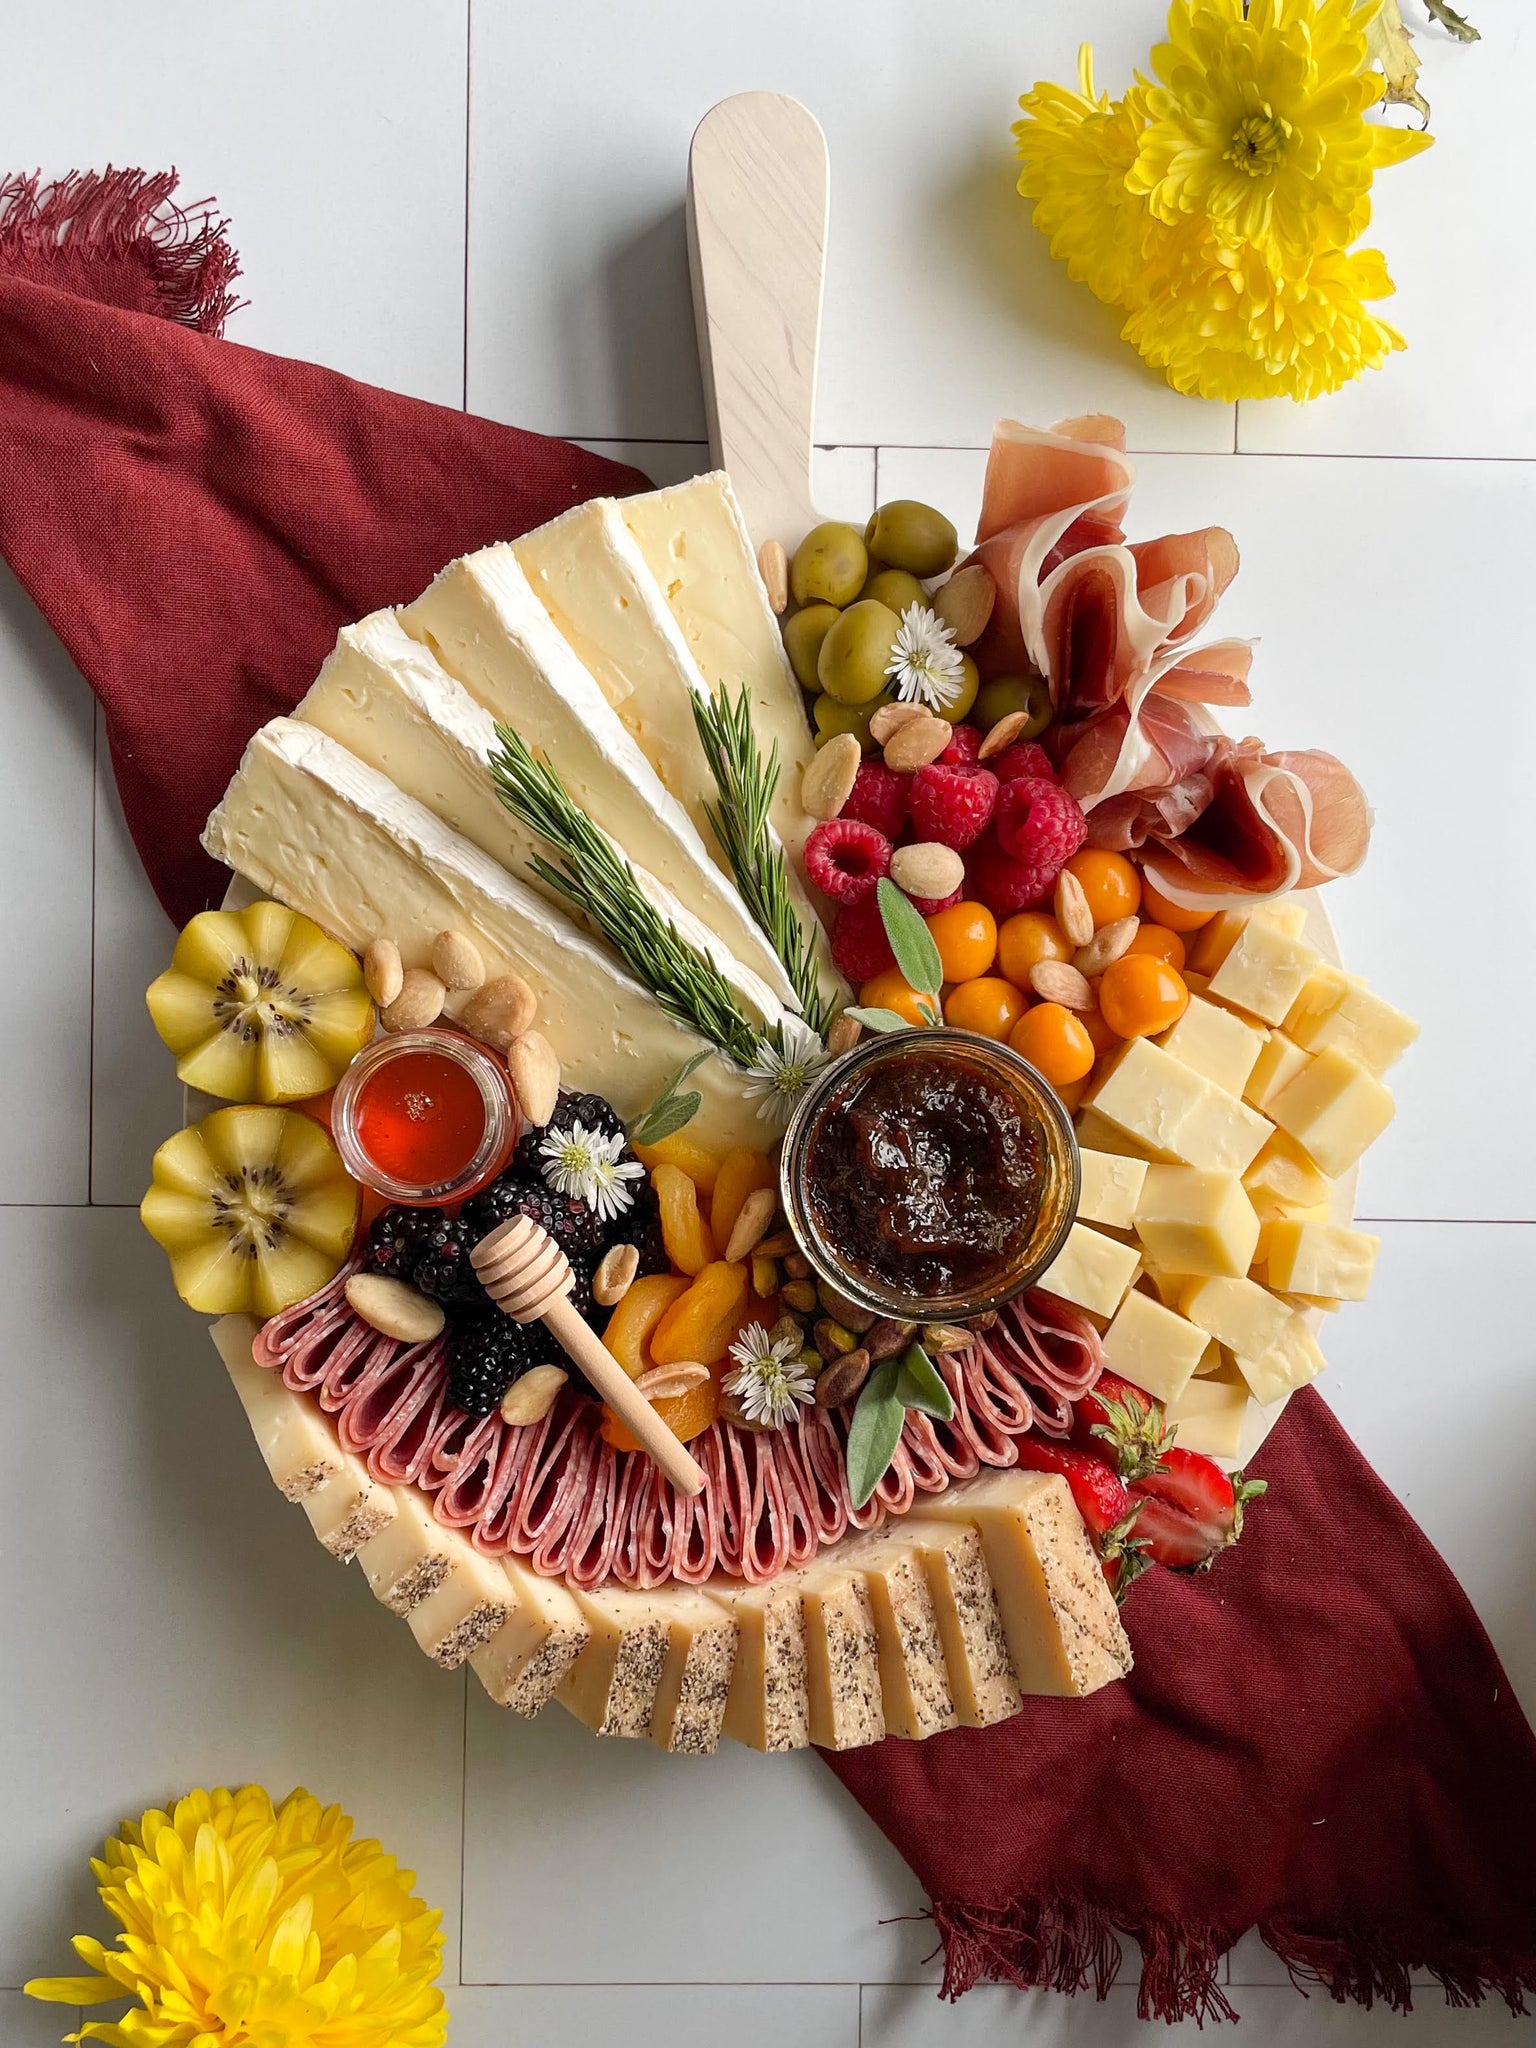 How to Create a Charcuterie Board for Thanksgiving Dinner and Holidays